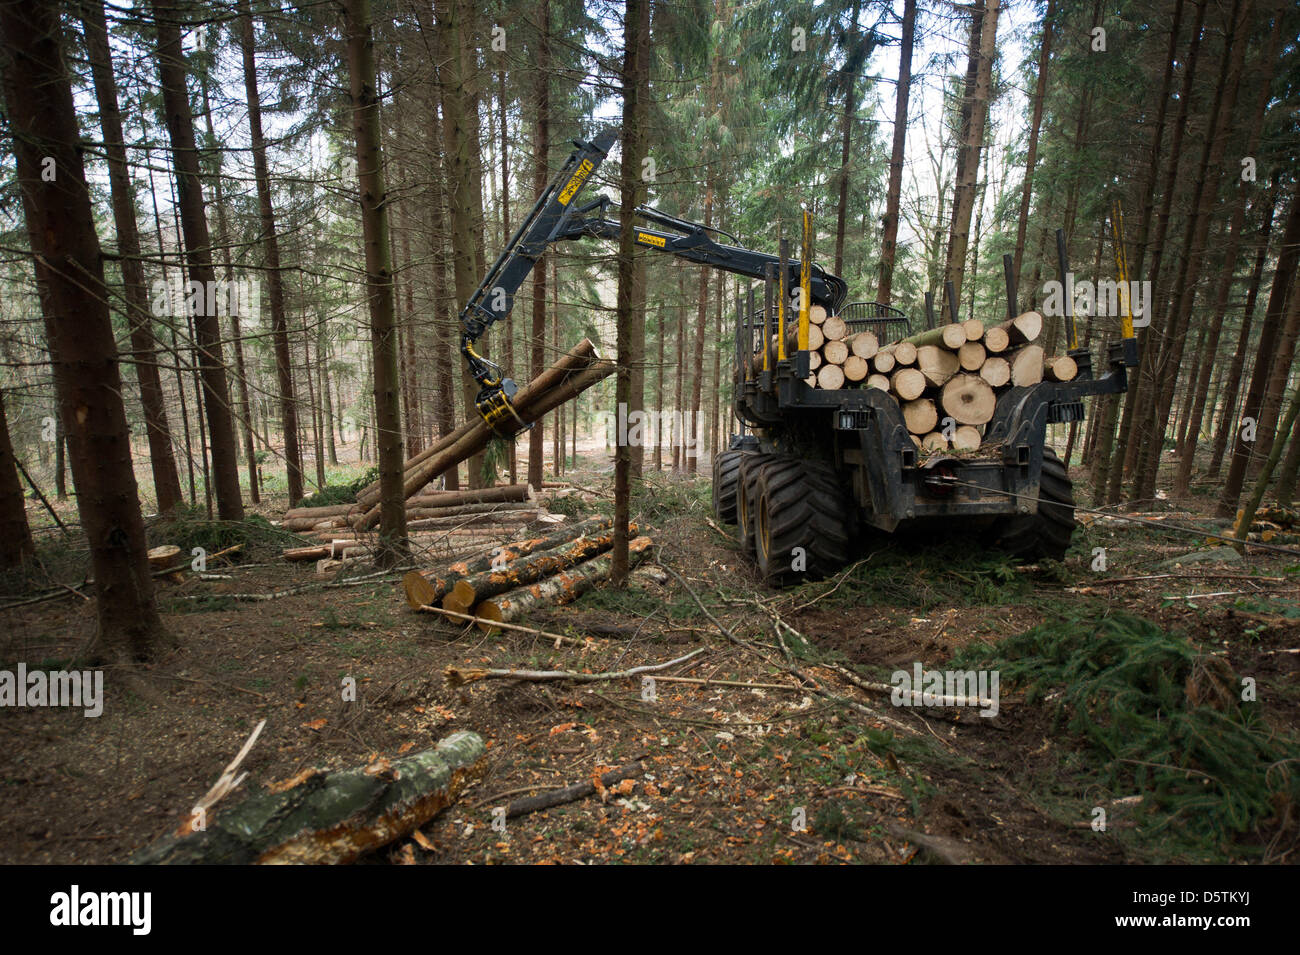 A forwarder vehicle collects wood during the timber harvest by the Saxon State Forestry Service in the Unger forest district near Neustadt, Germany, 26 November 2012. Around 1.5 hectares and 10 percent of the area of the forest district will be thinned according to plan. Almost 80,000 cubic meters of wood with a value of around 4.2 million euros will be harvested. Photo: Arno Burgi Stock Photo